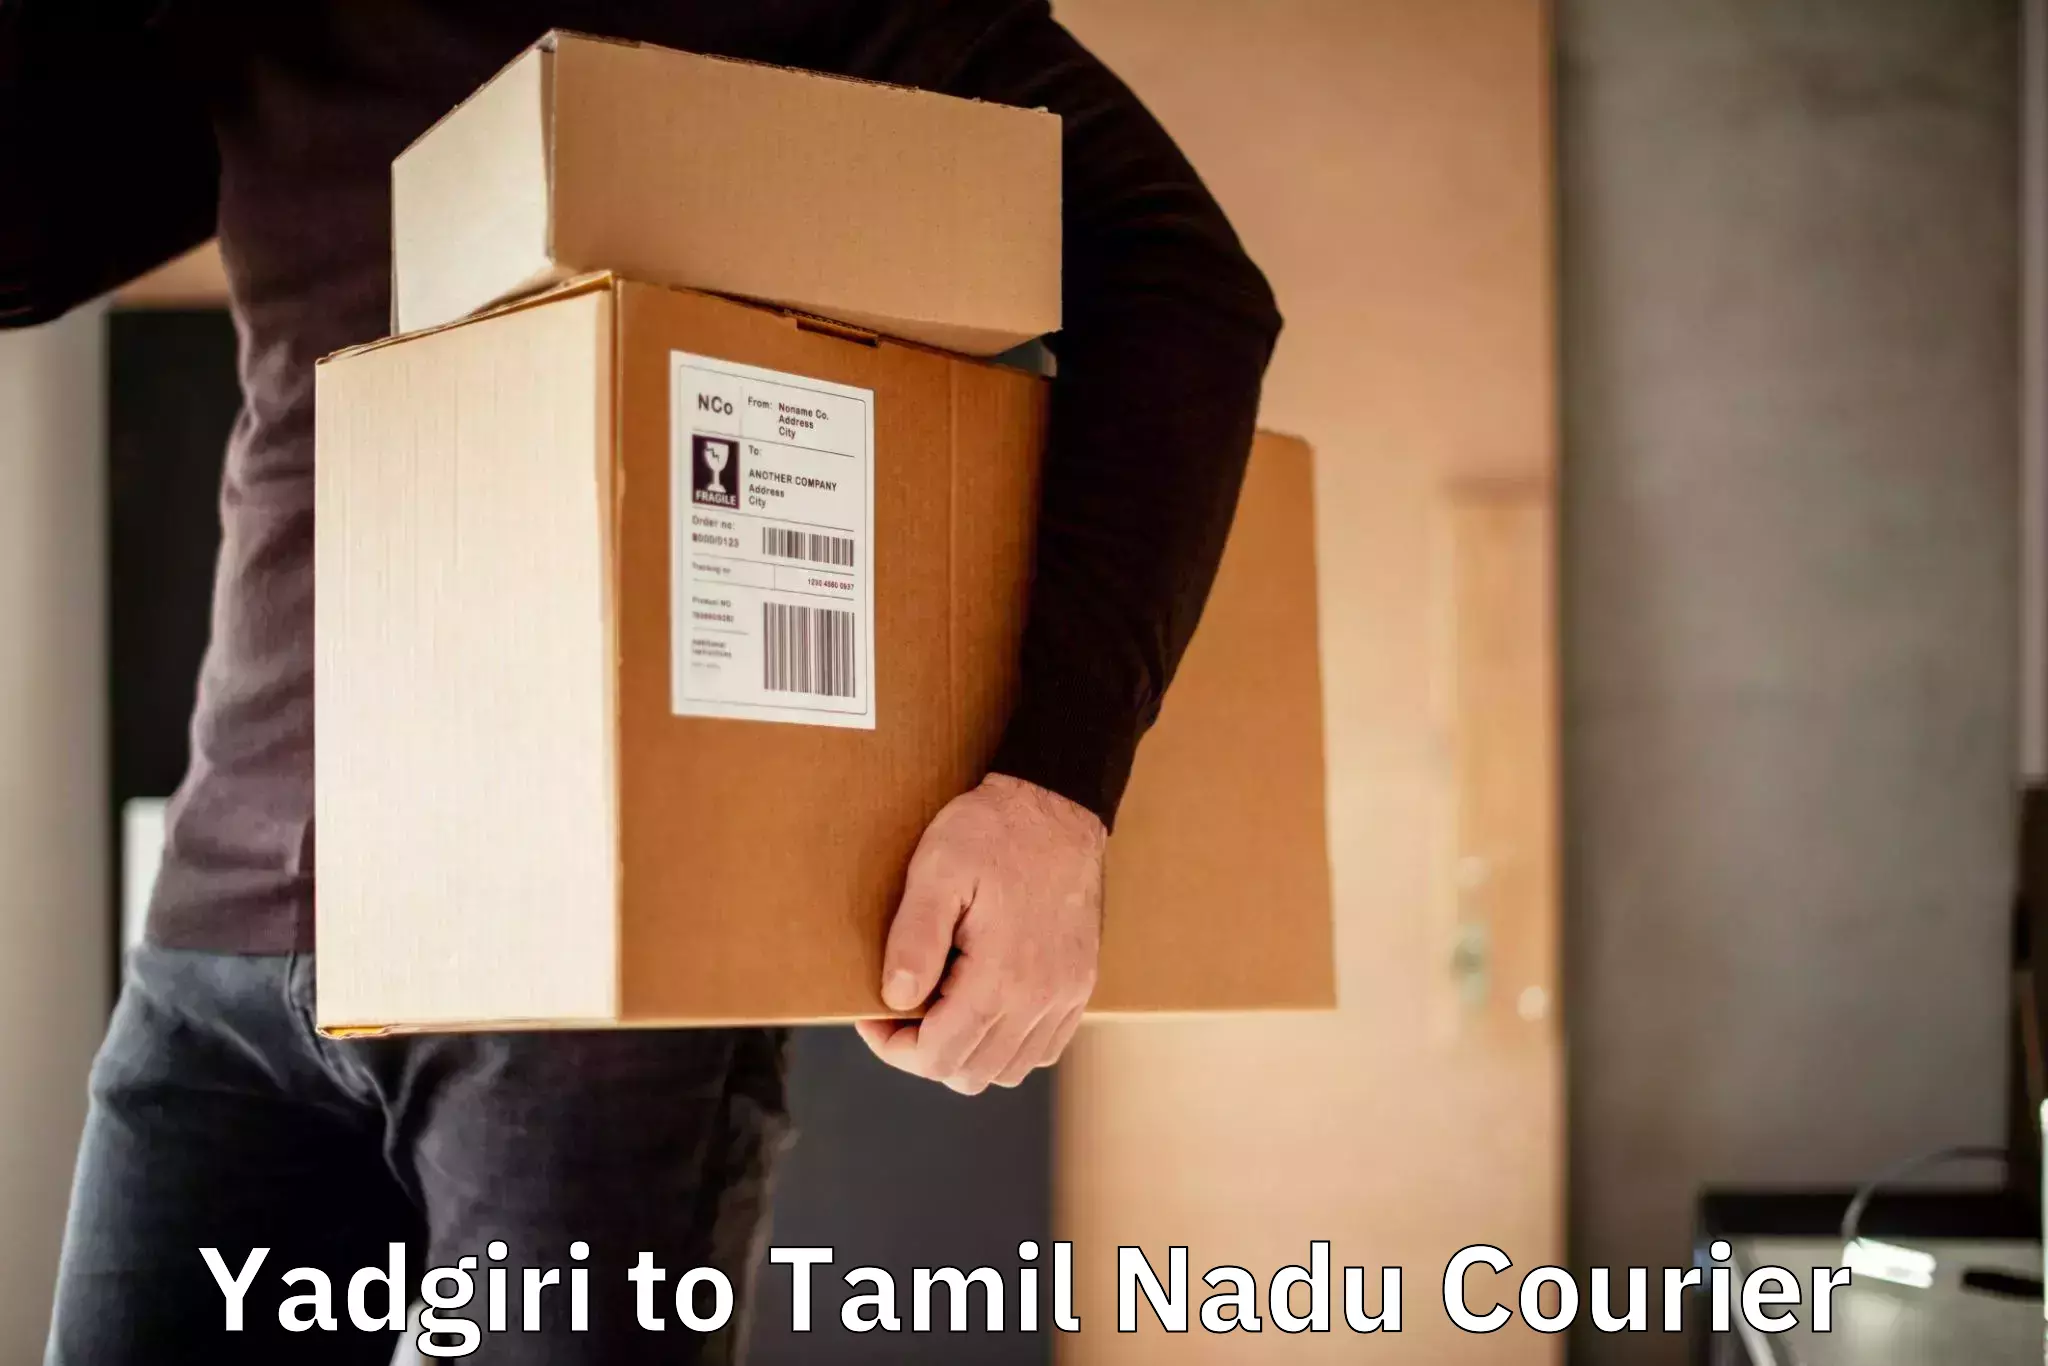 Reliable courier service Yadgiri to Marthandam